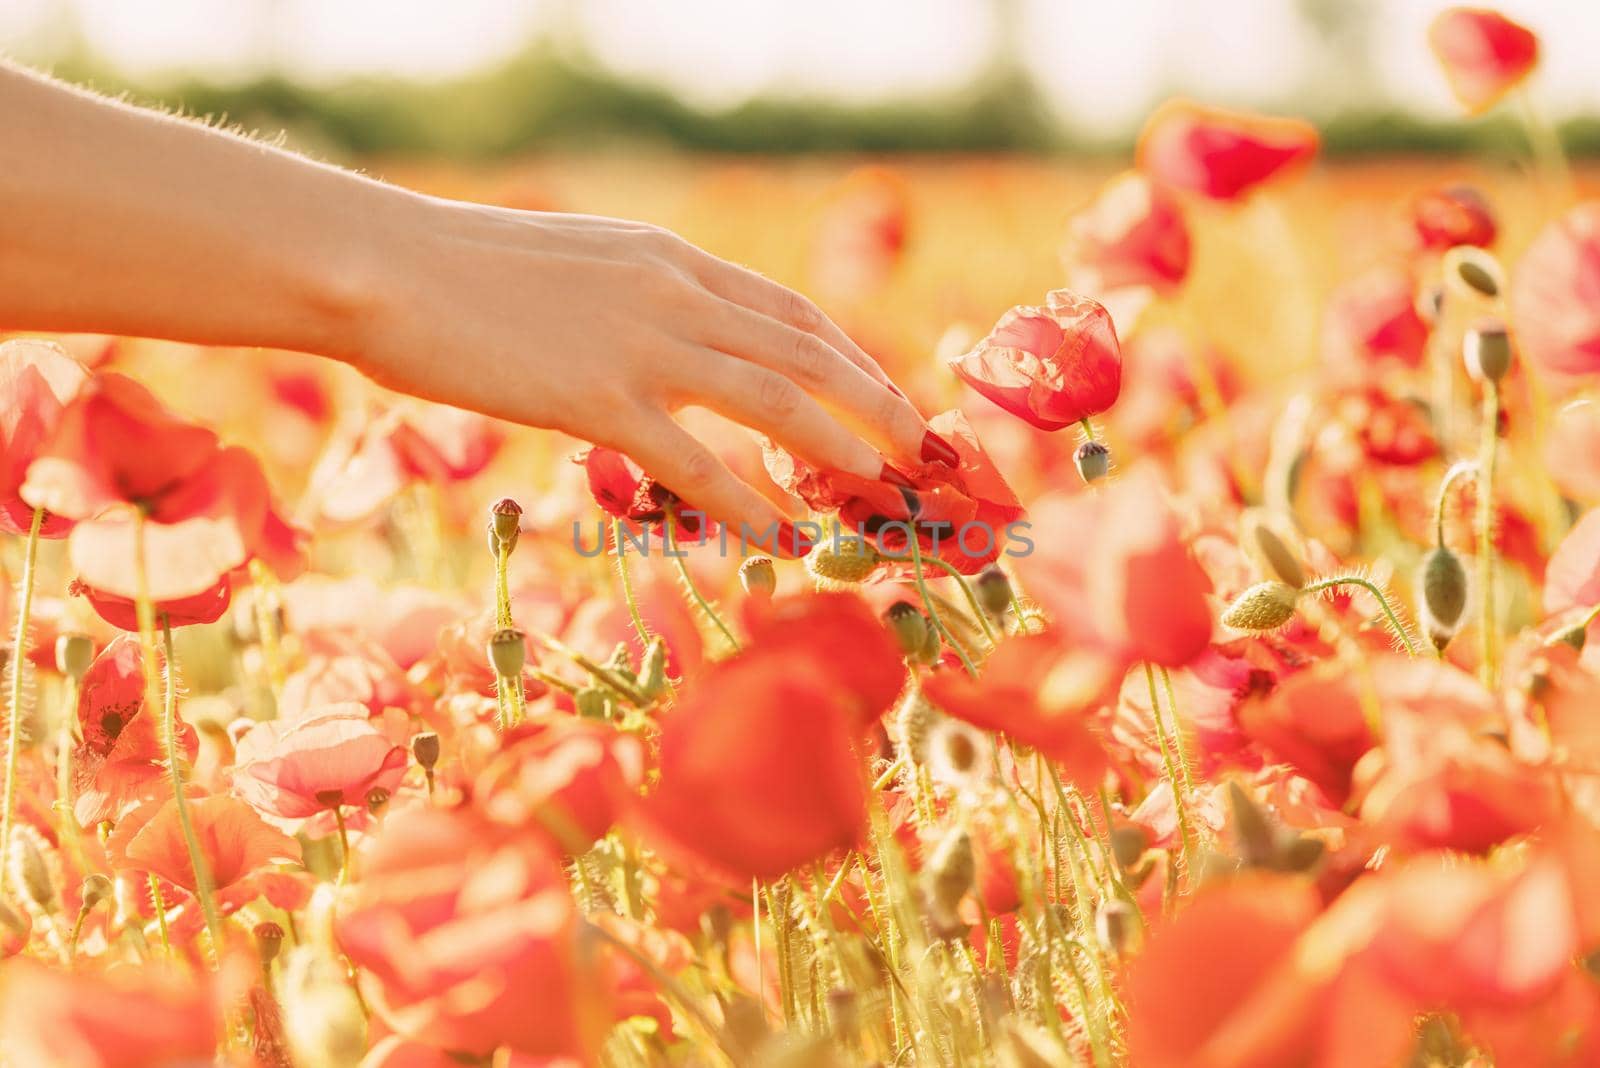 View of female hand touching red poppies in flower meadow on sunny day, close-up.